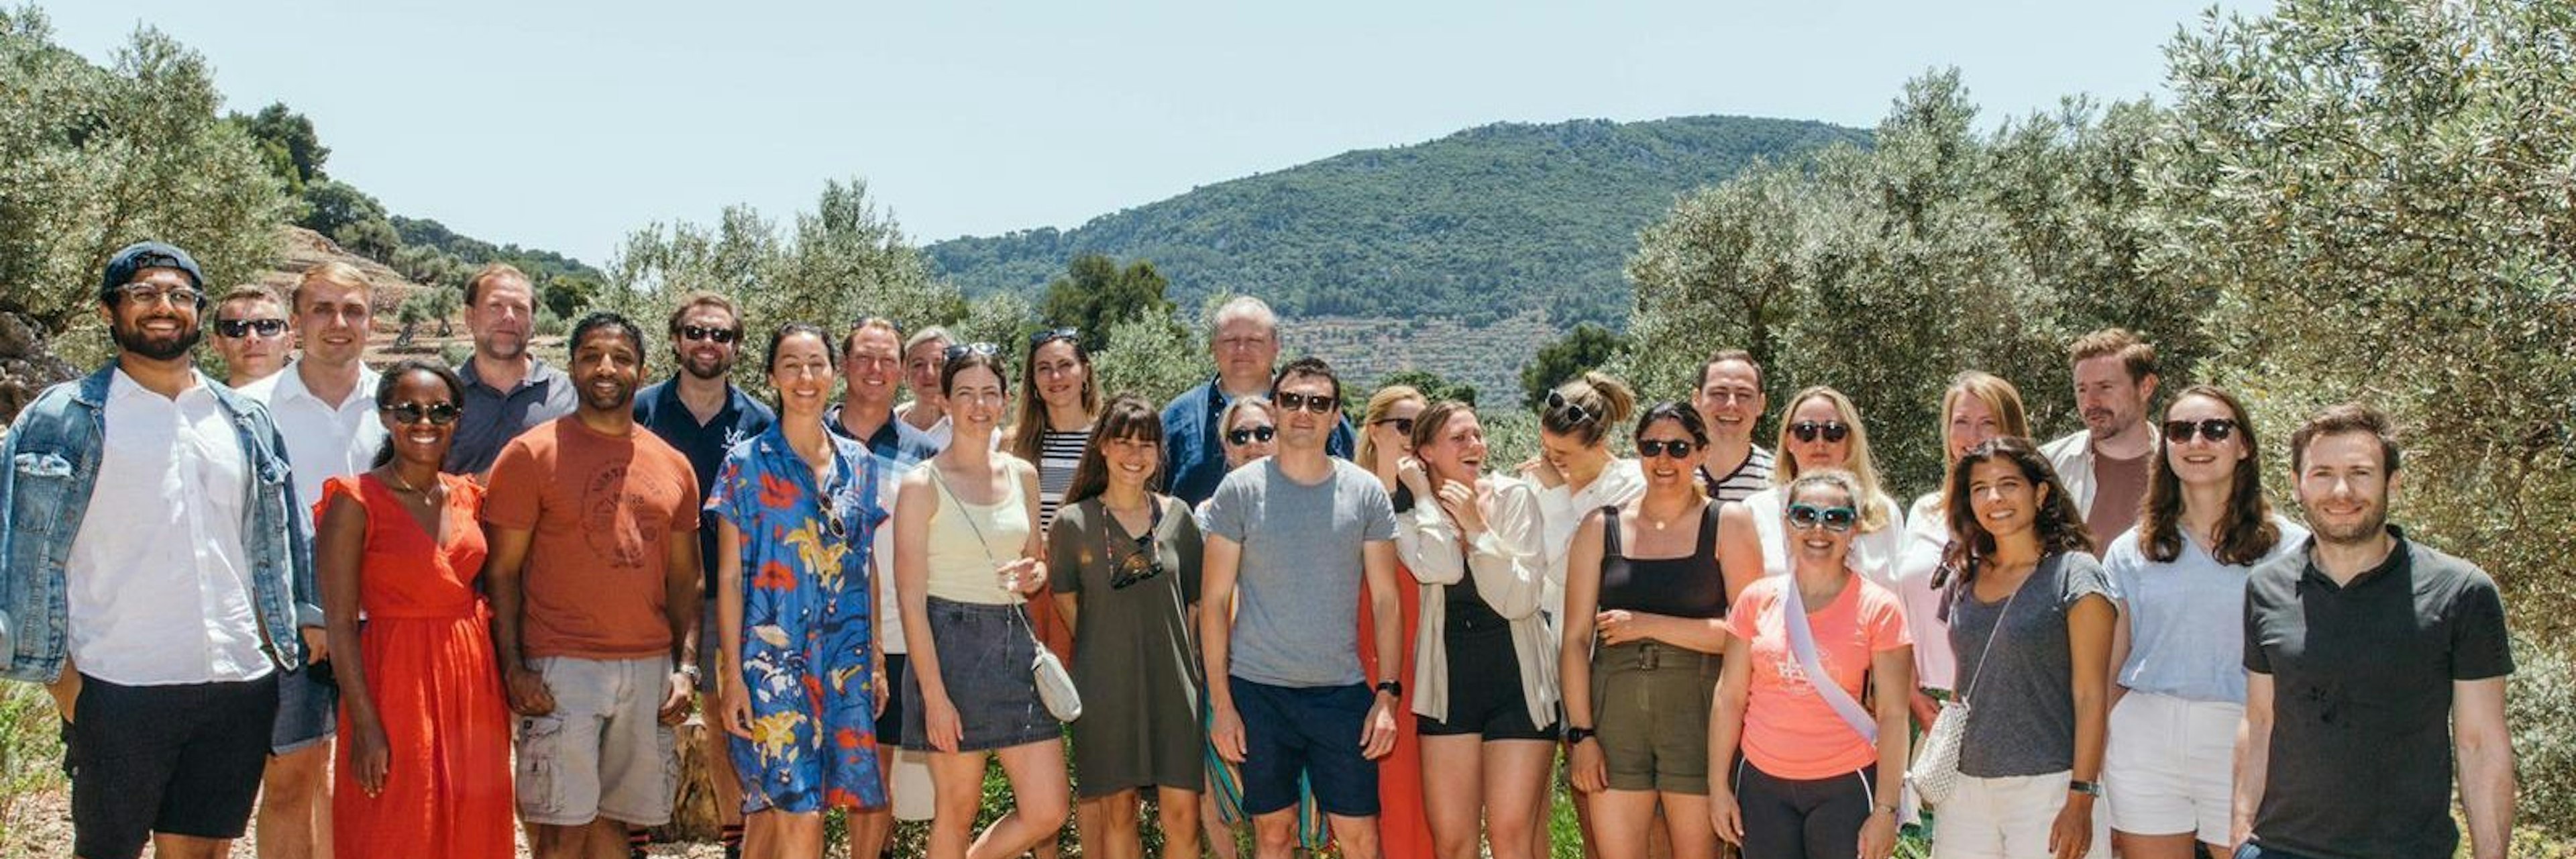 A group image of the team at EQT Ventures on a hike